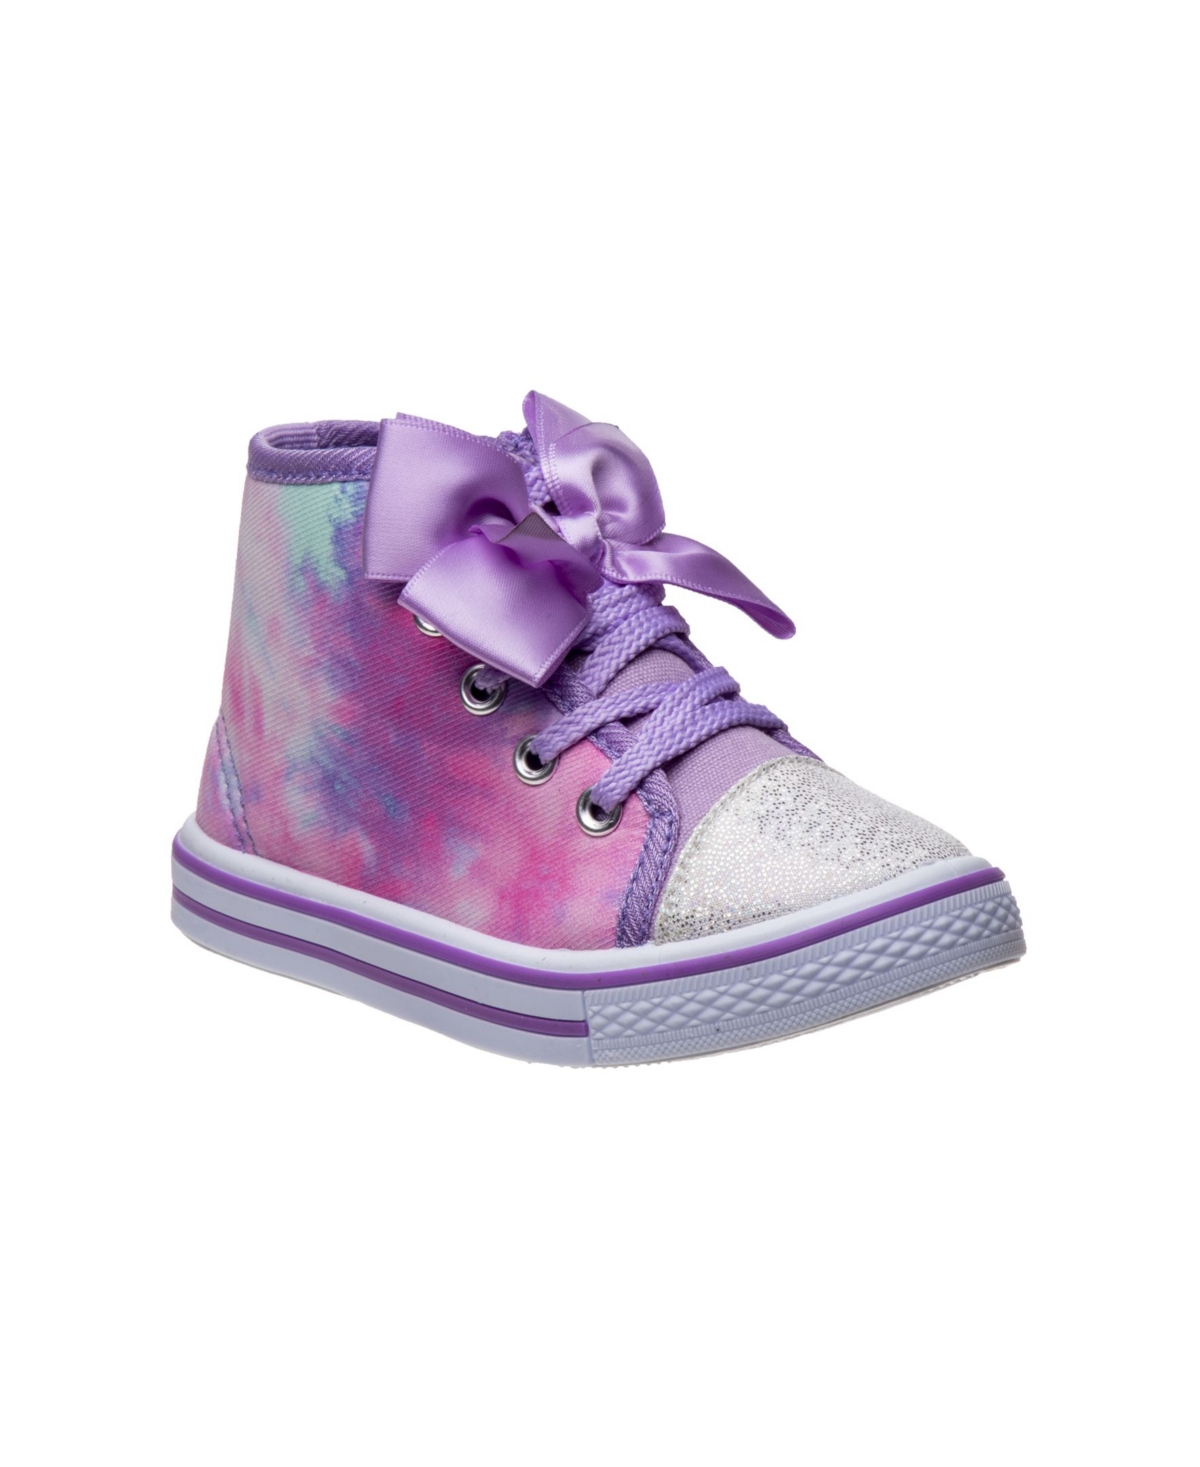 Laura Ashley Babies' Toddler Girls Signature Bow High Top Sneakers In Purple